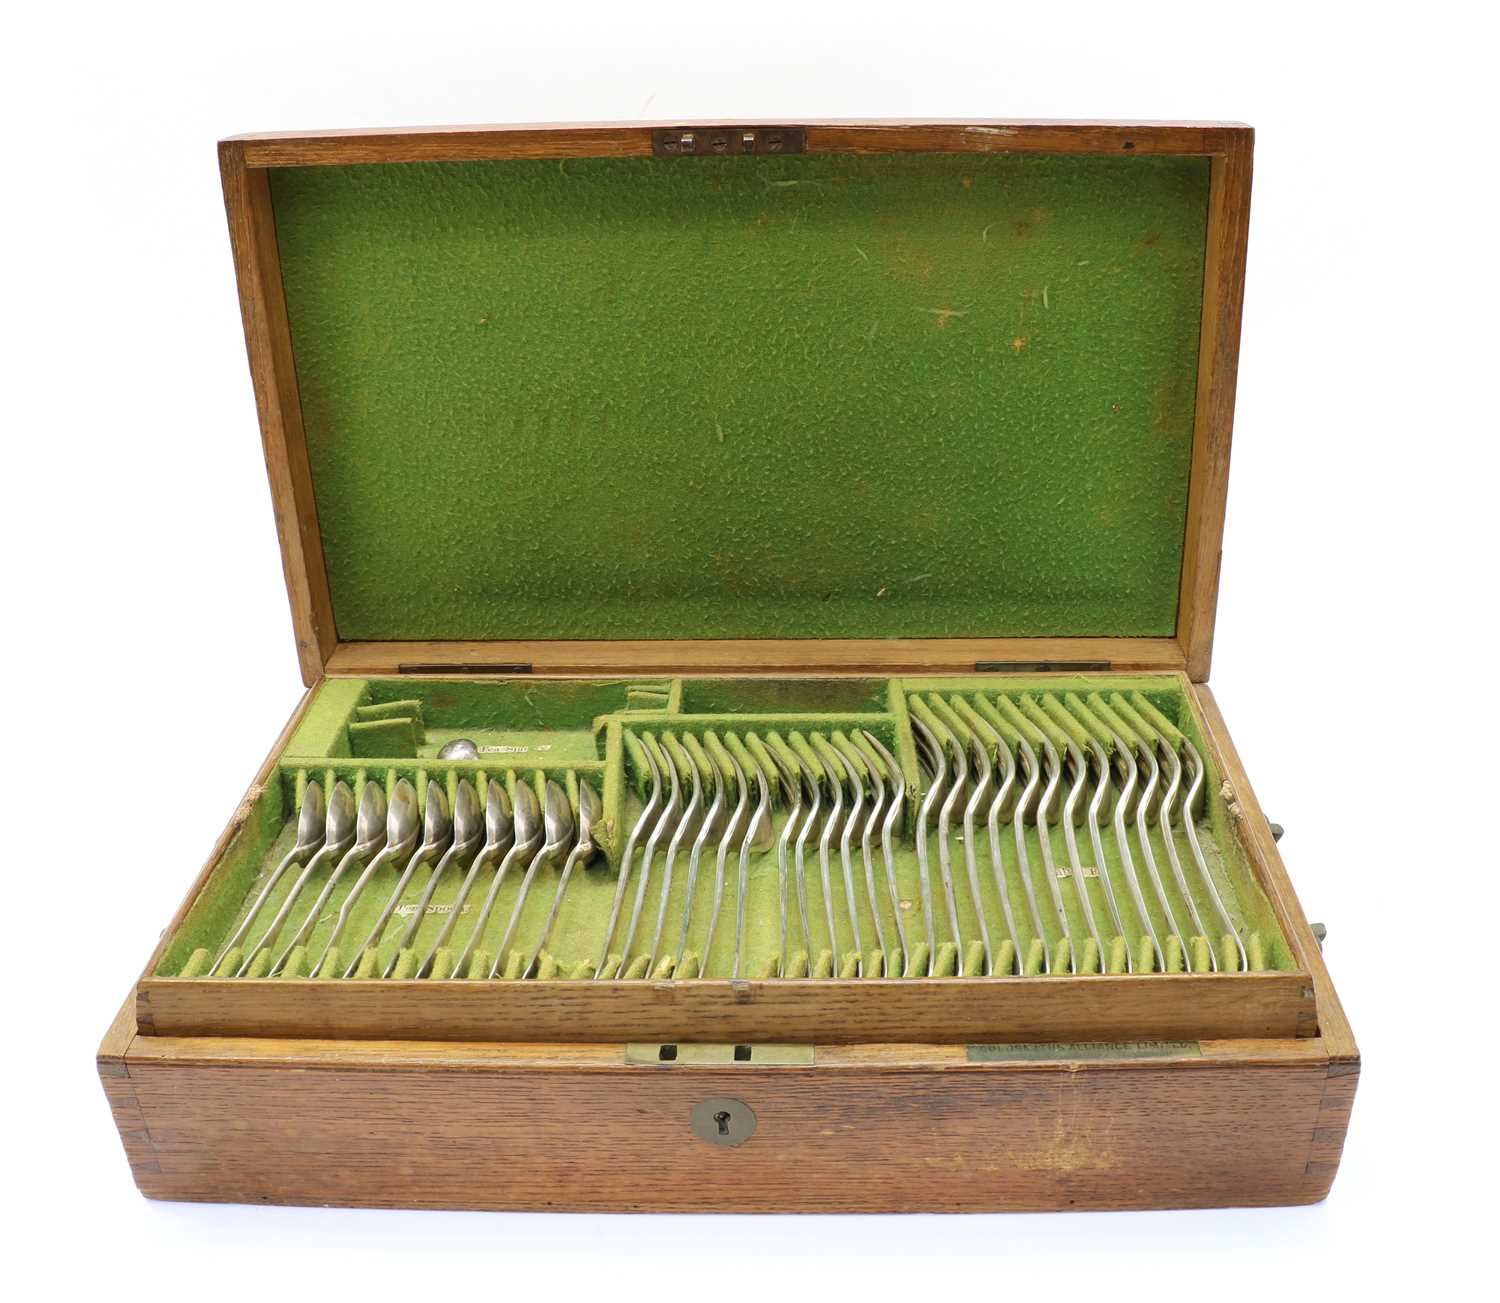 Lot 46 - A composite set of Victorian silver cutlery